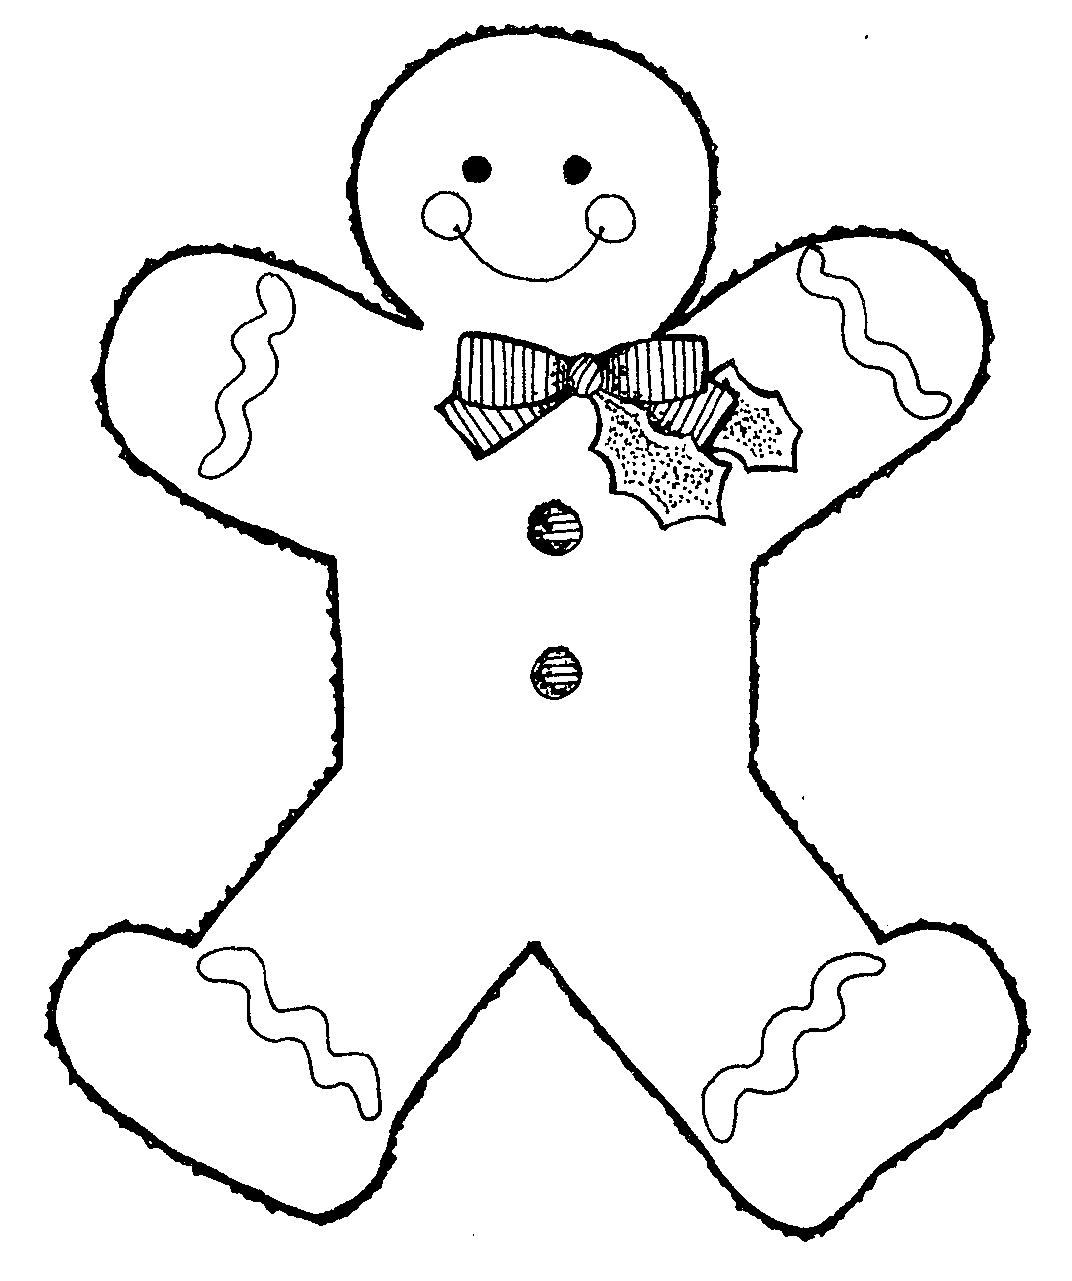 Gingerbread man black and white clipart kid 2